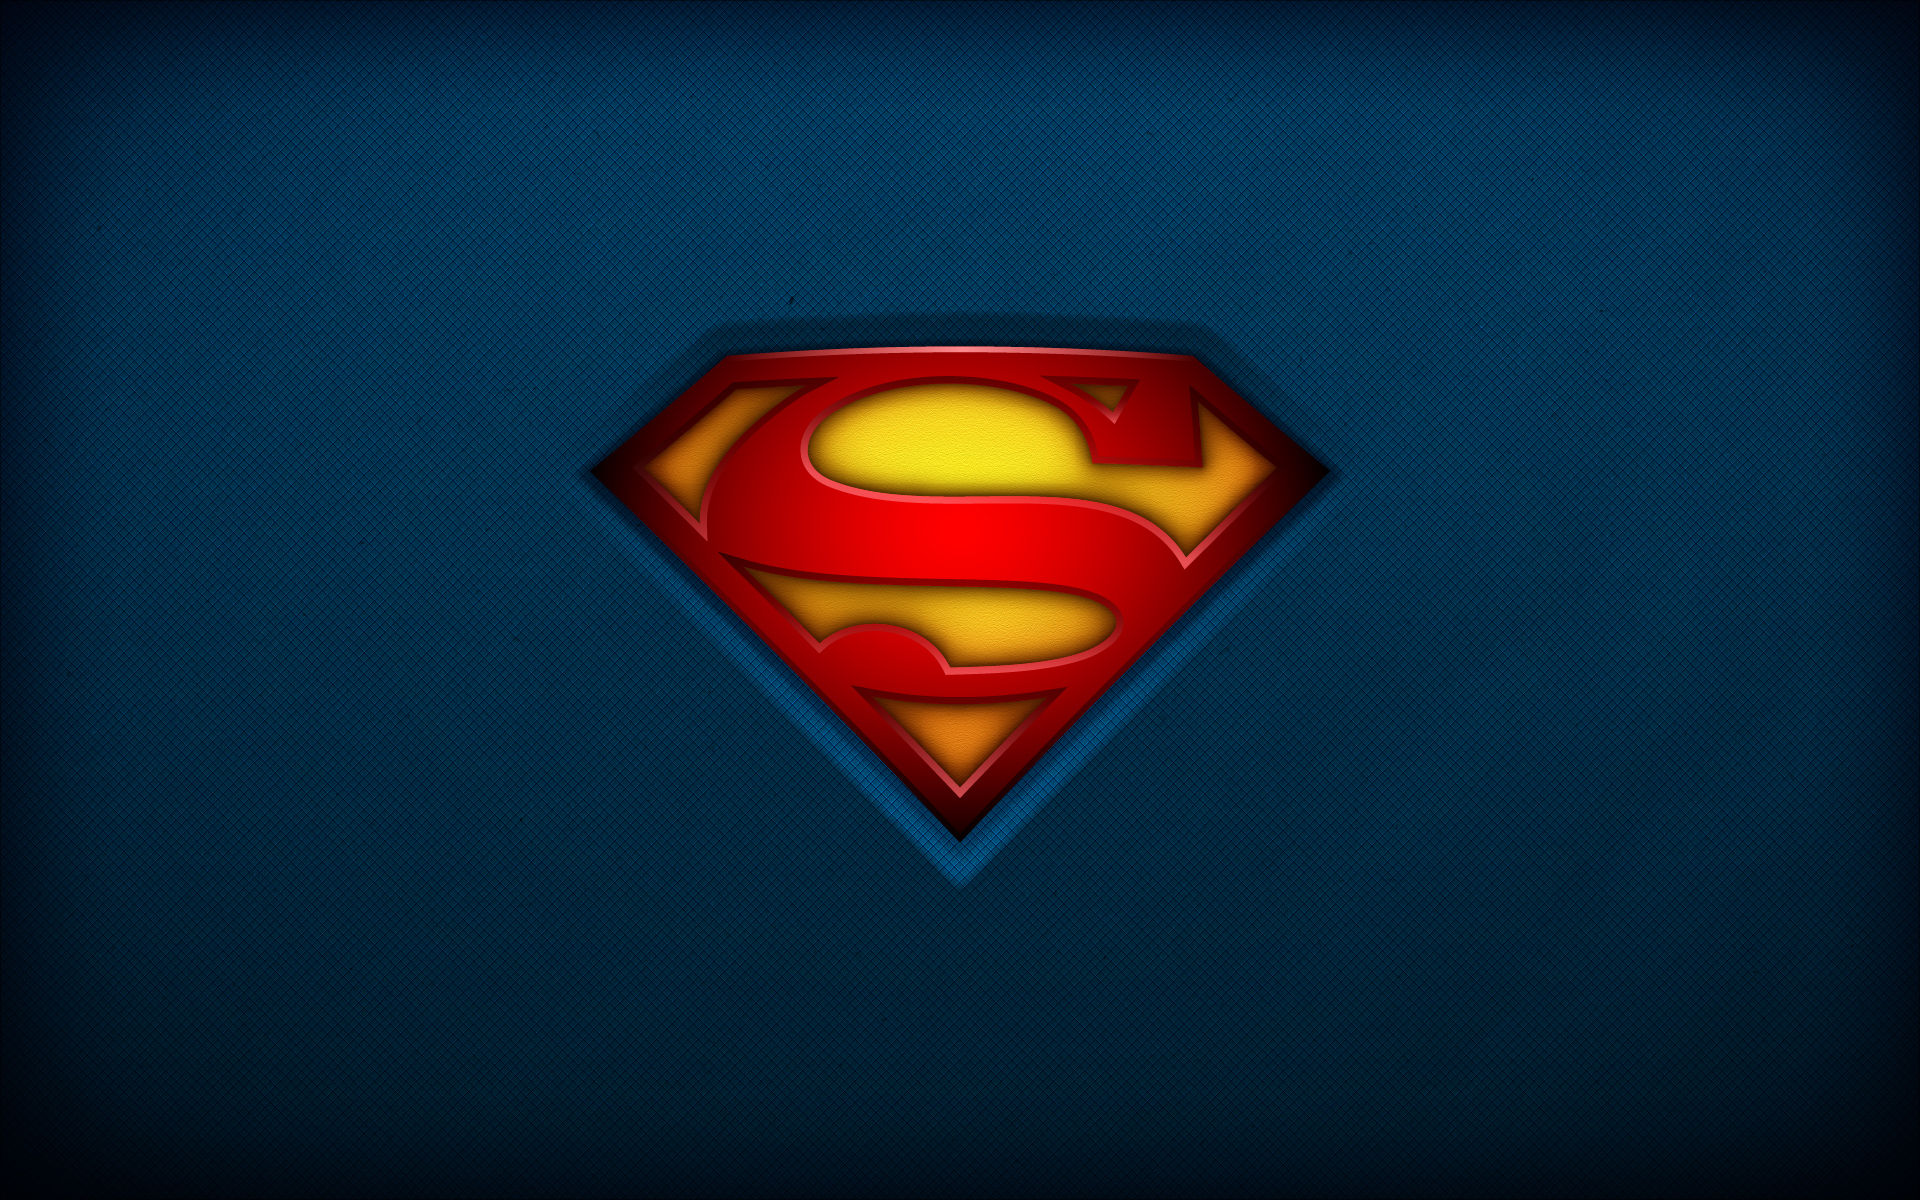 Superman Logo Hd Images amp Pictures   Becuo